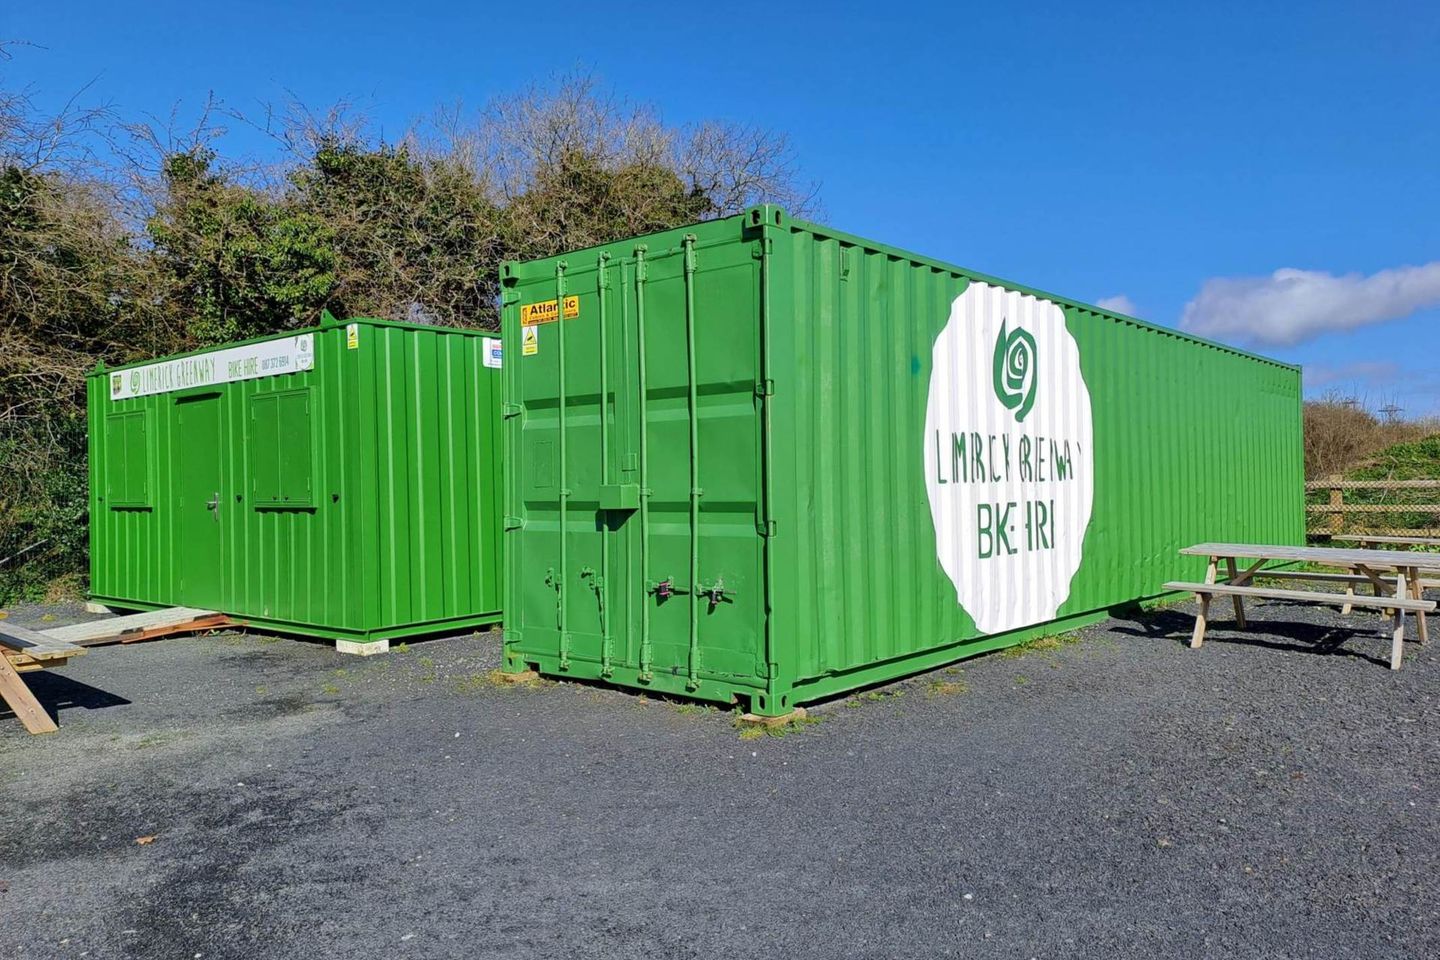 Retail Container Facilites, Limerick Greenway Hub Car Park, Newcastle West, Co. Limerick